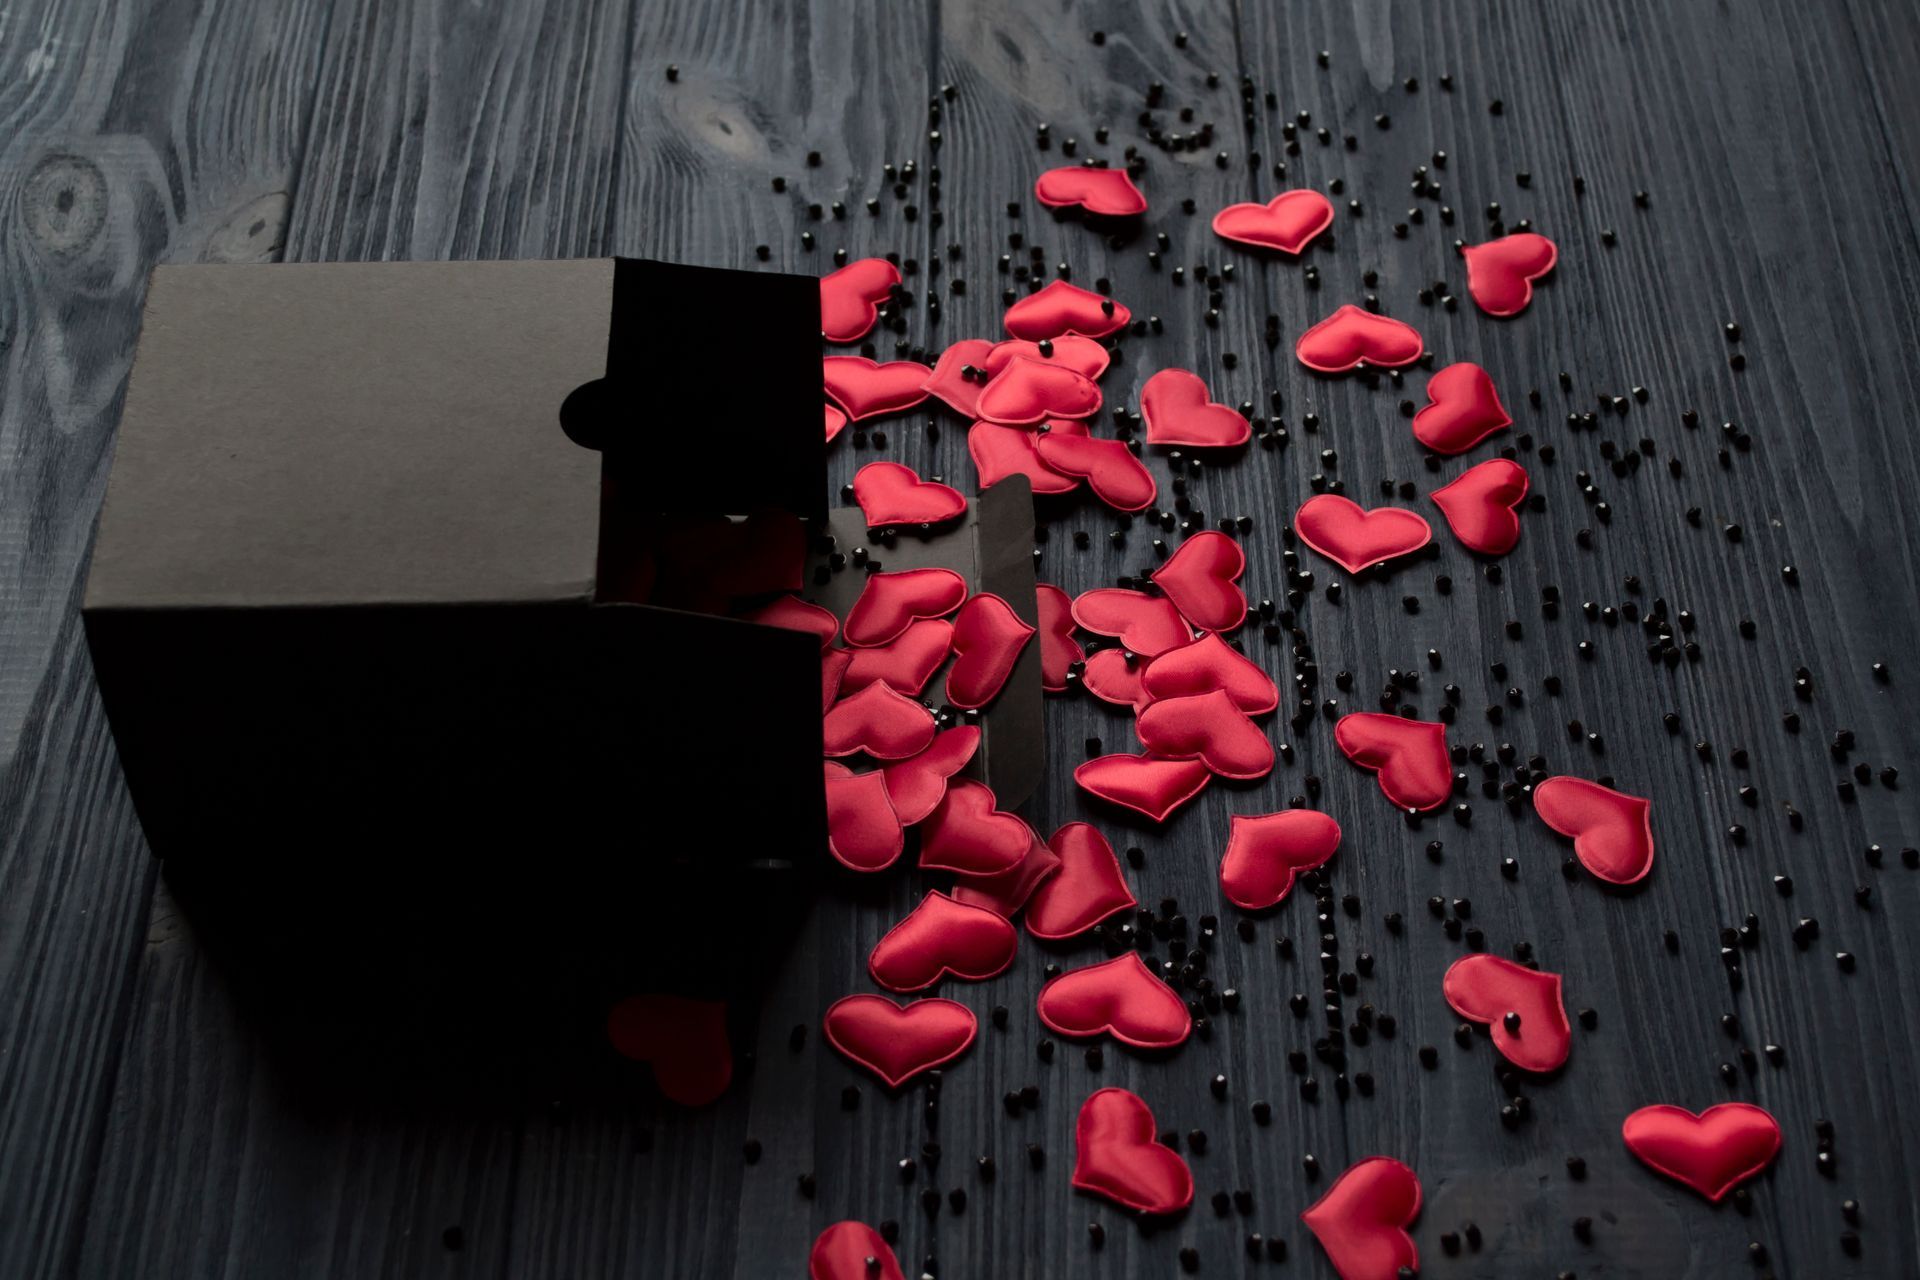 Red hearts are falling out of a black box on a wooden table.